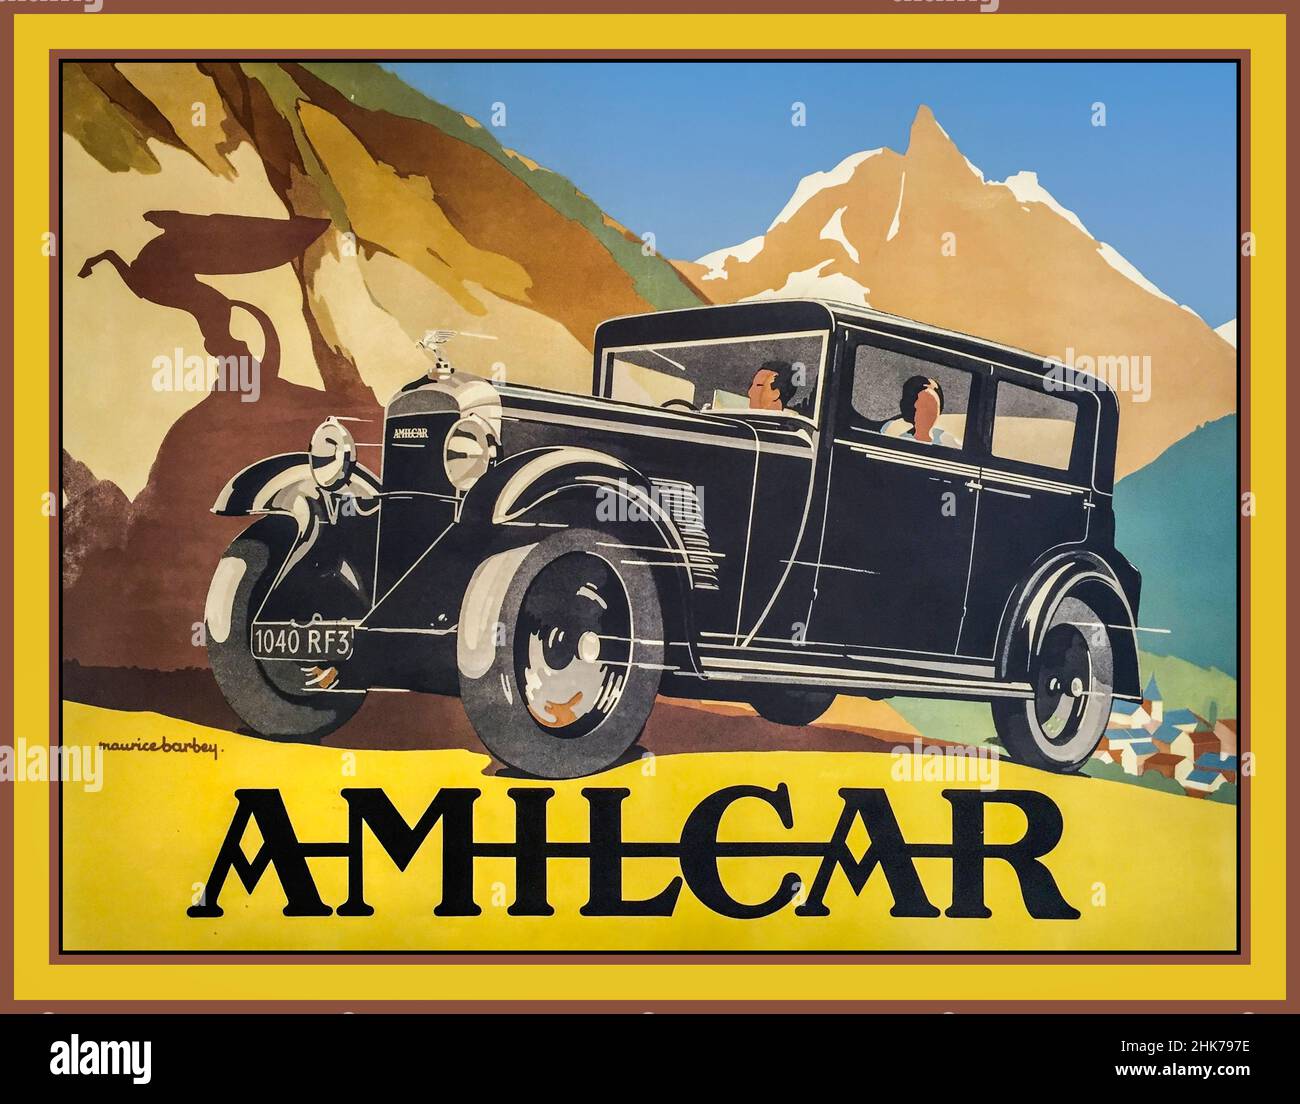 Vintage French motorcar 1900s AMILCAR 1932 Poster by Maurice Barbey ,Amilcar Berline M3 Sedan The Amilcar was a French automobile manufactured from 1921 to 1940. Stock Photo